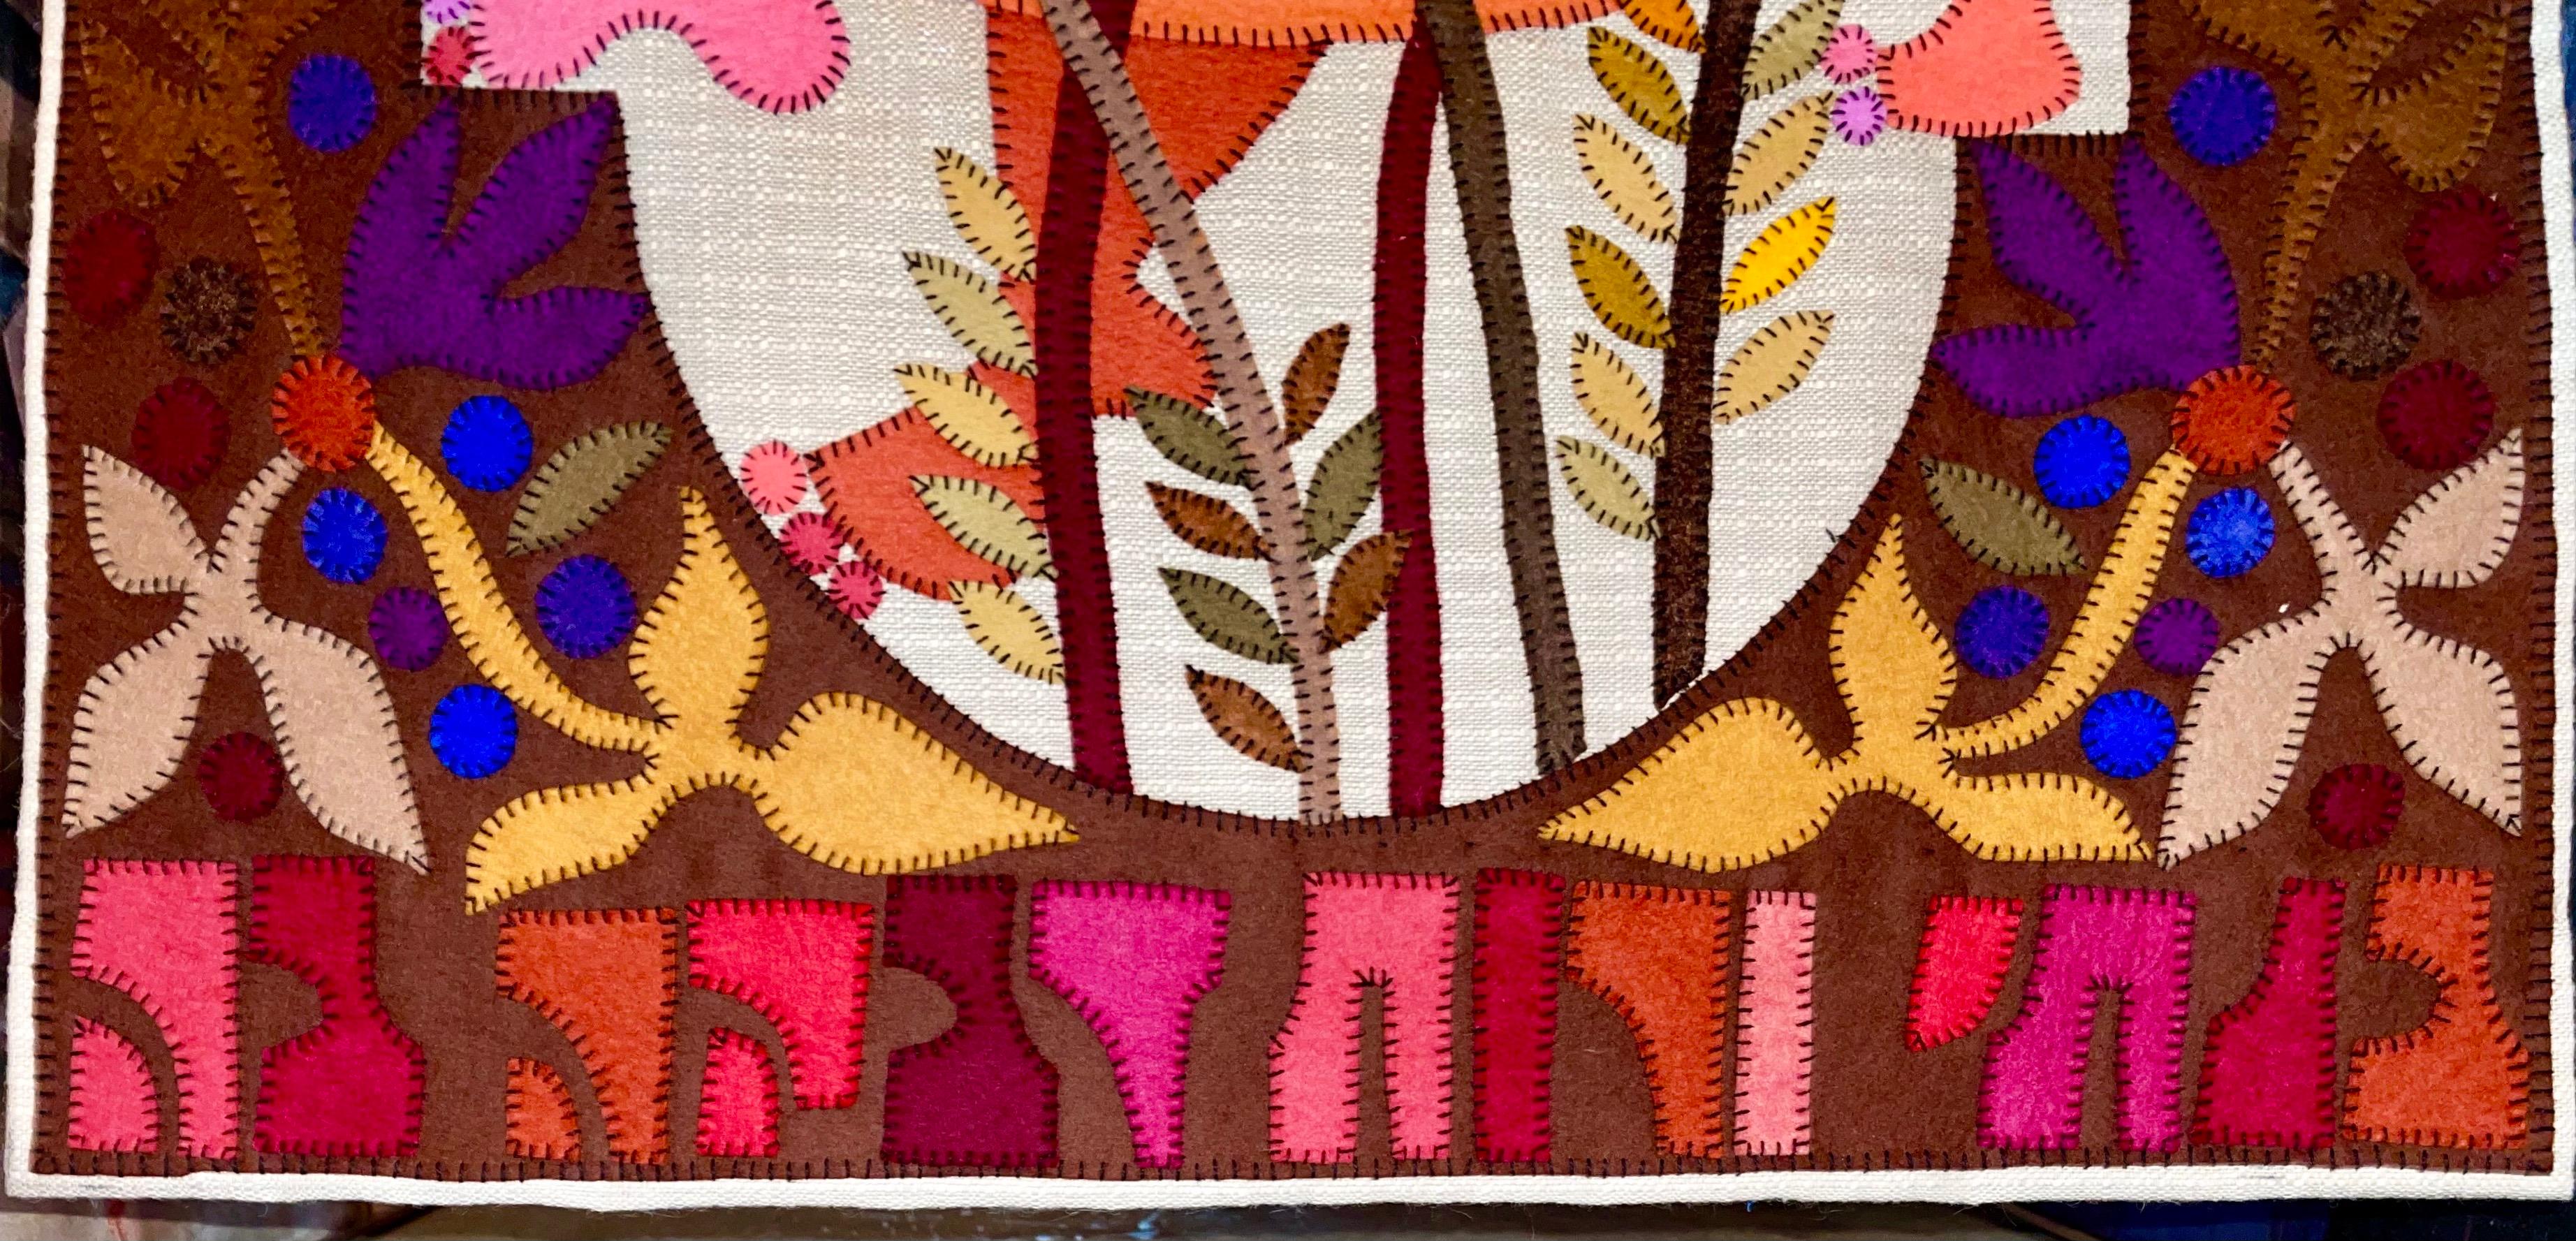 This tapestry wall hanging depicts two women embracing, Ruth and Naomi, the ancestor of King David, all made by hand. Woven and stitched. With a bible verse in hebrew.

Kopel Gurwin (Hebrew: קו�פל גורבין‎) (1923–1990) was an Israeli Bezalel School